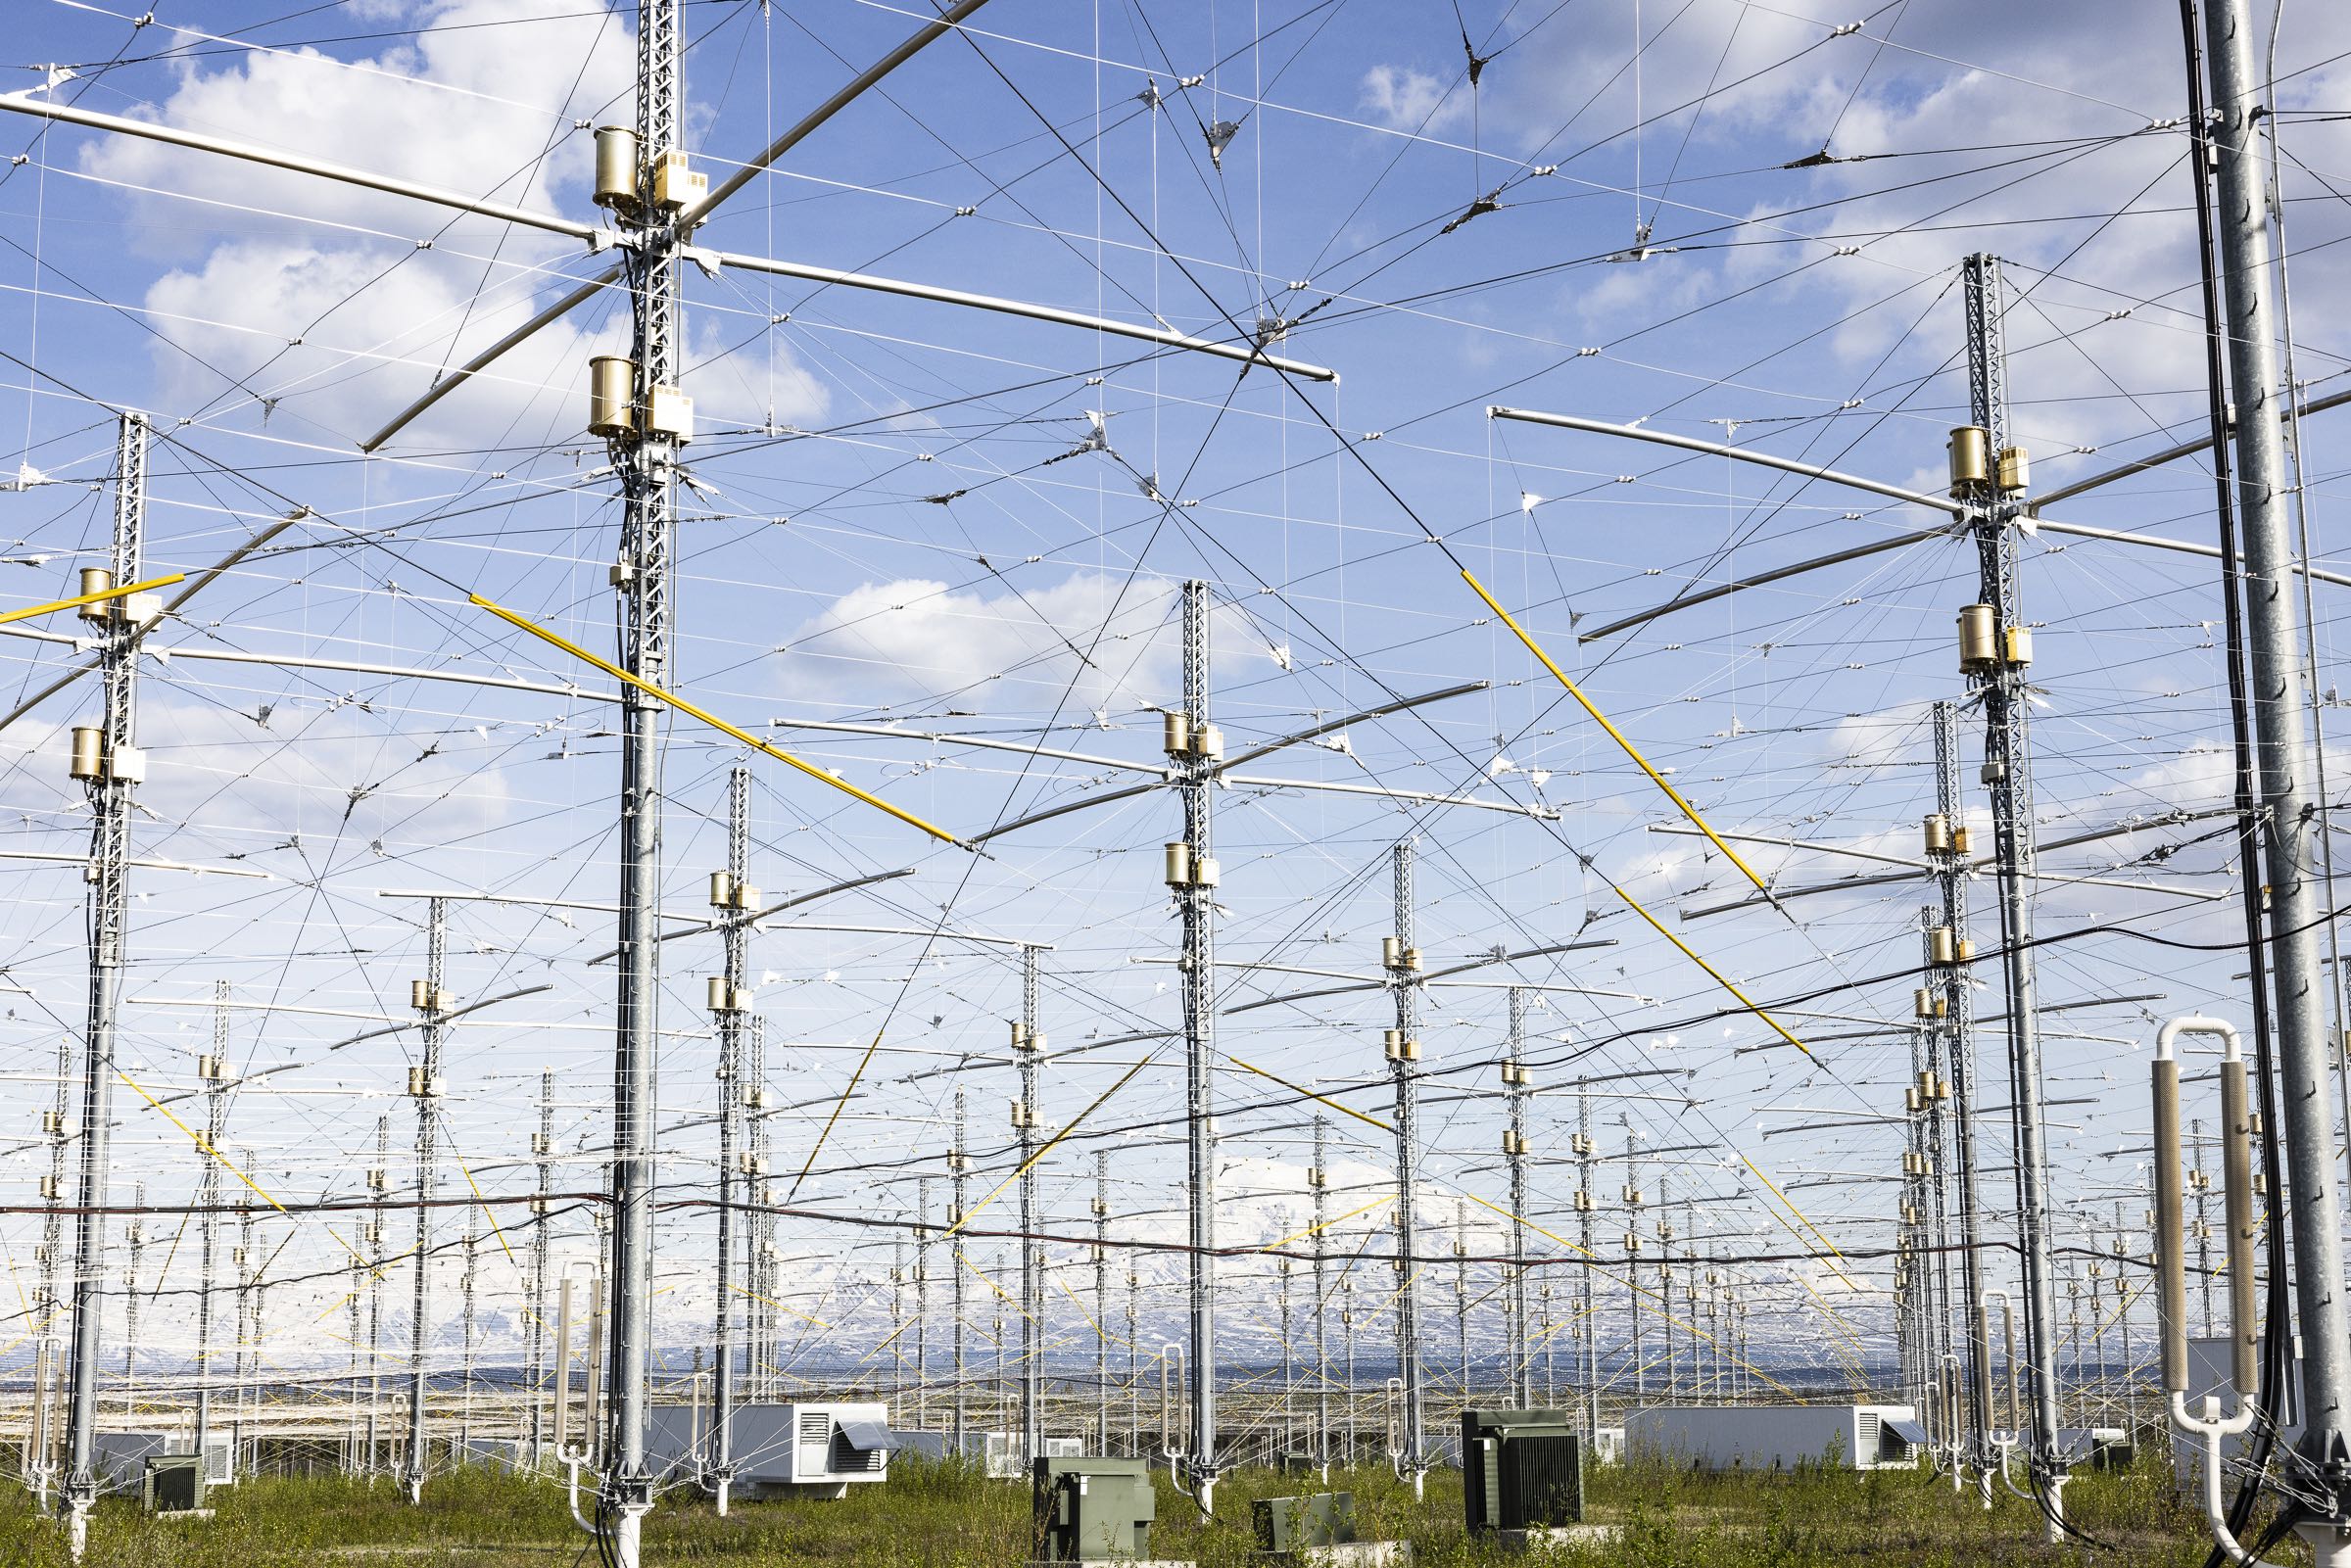 HAARP to hold public open house Saturday, Aug. 27 | UAF news and information